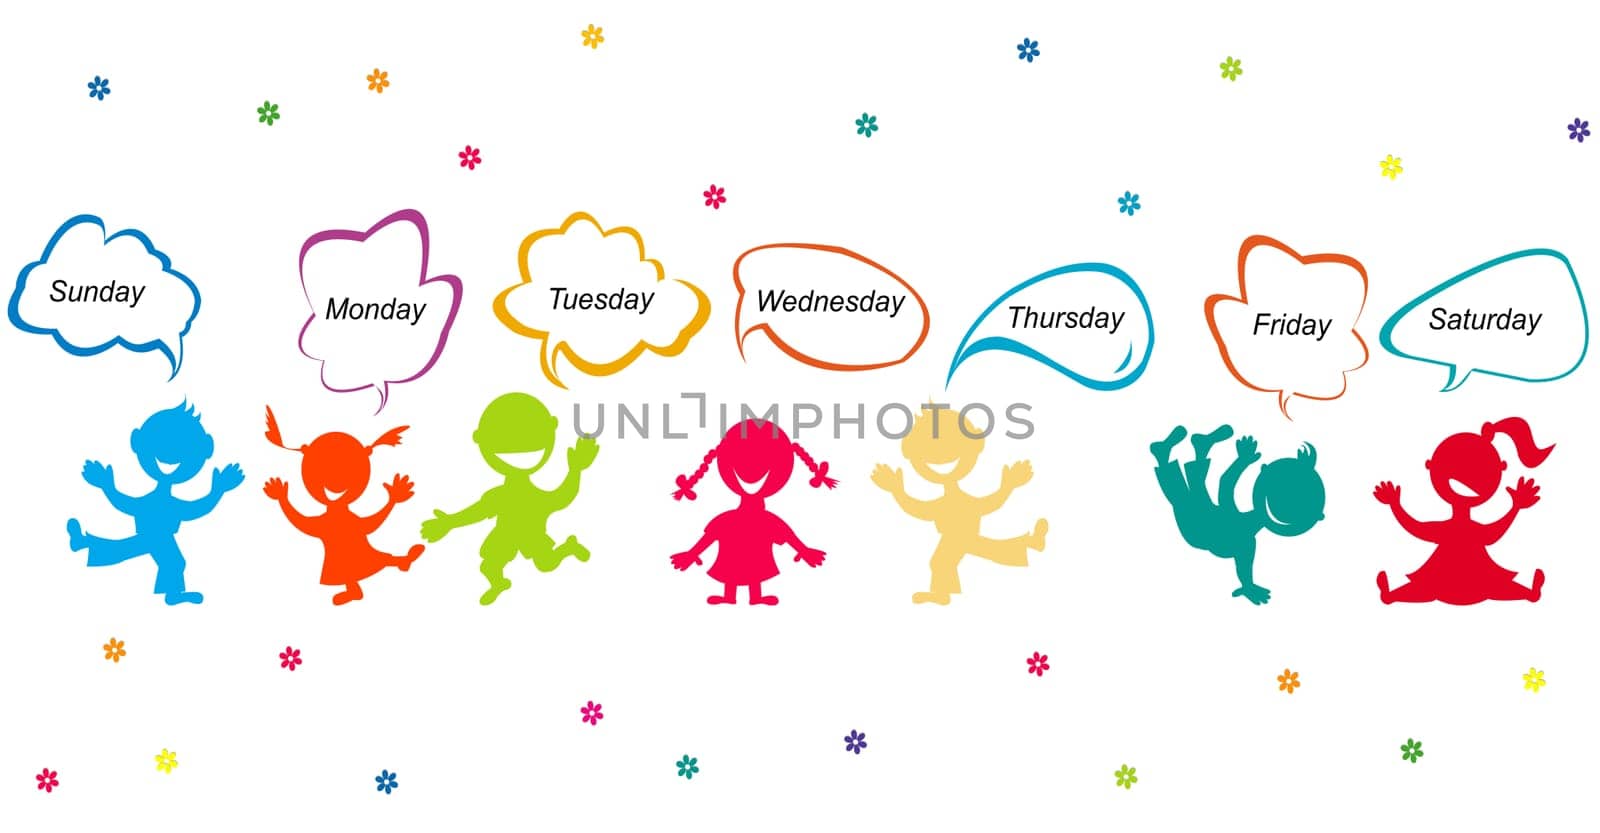 Colorful cartoon kids with days of the week written in chat bubbles